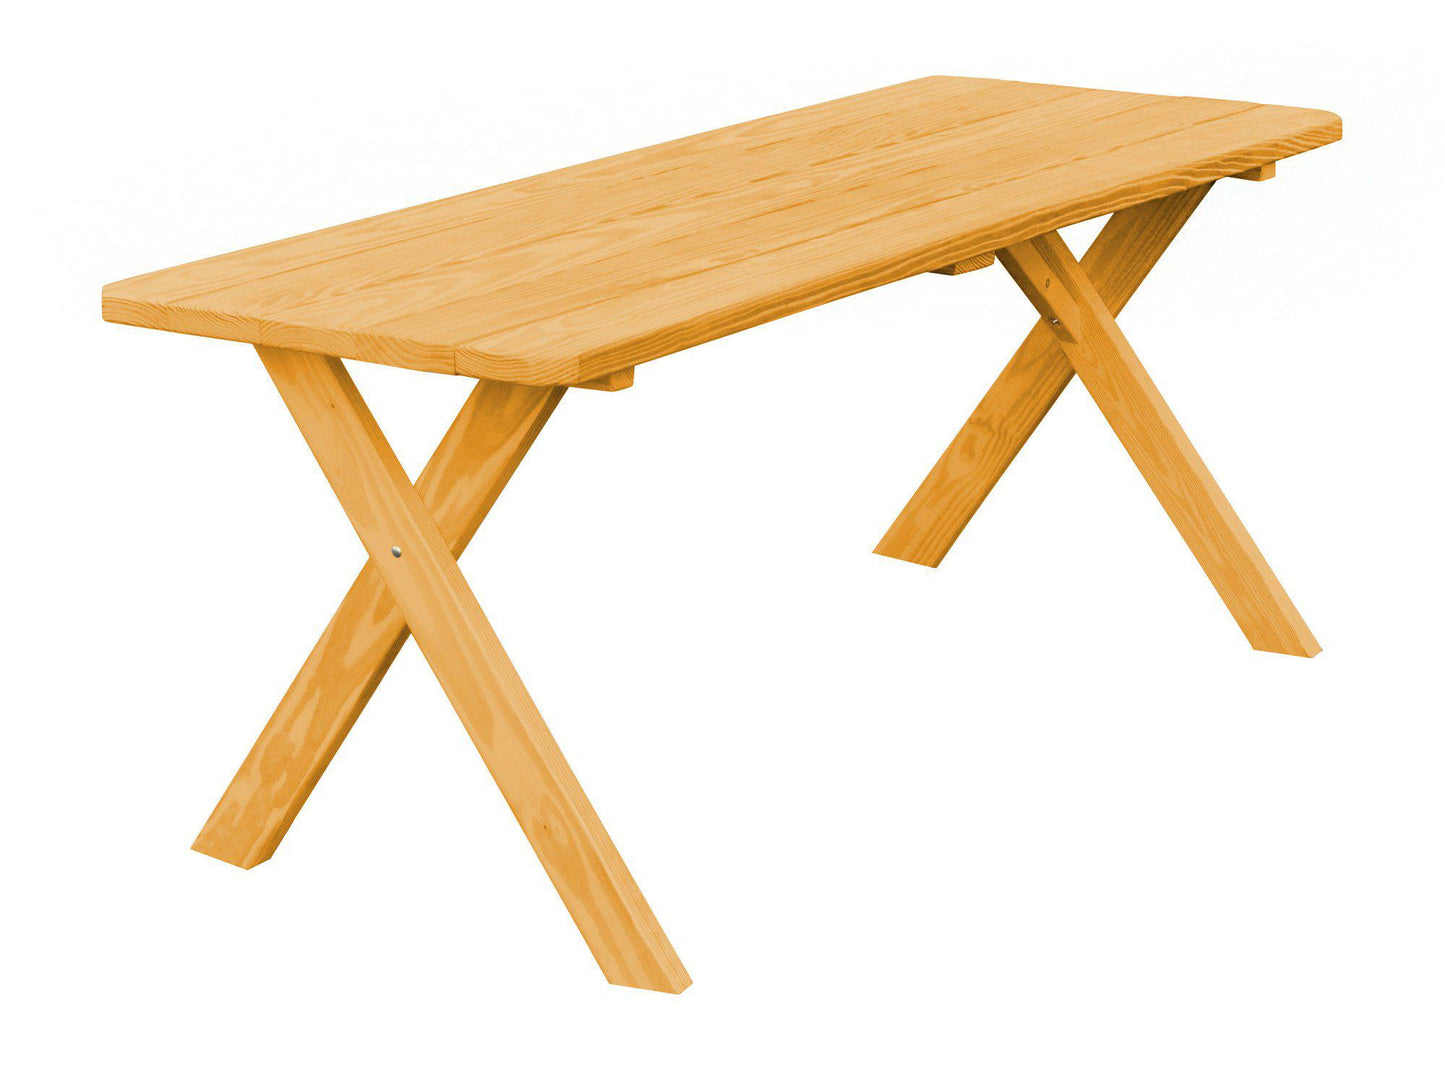 A&L Furniture Co. Yellow Pine 95" Cross-leg Table Only - Specify For Free 2" Umbrella Hole - LEAD TIME TO SHIP 10 BUSINESS DAYS